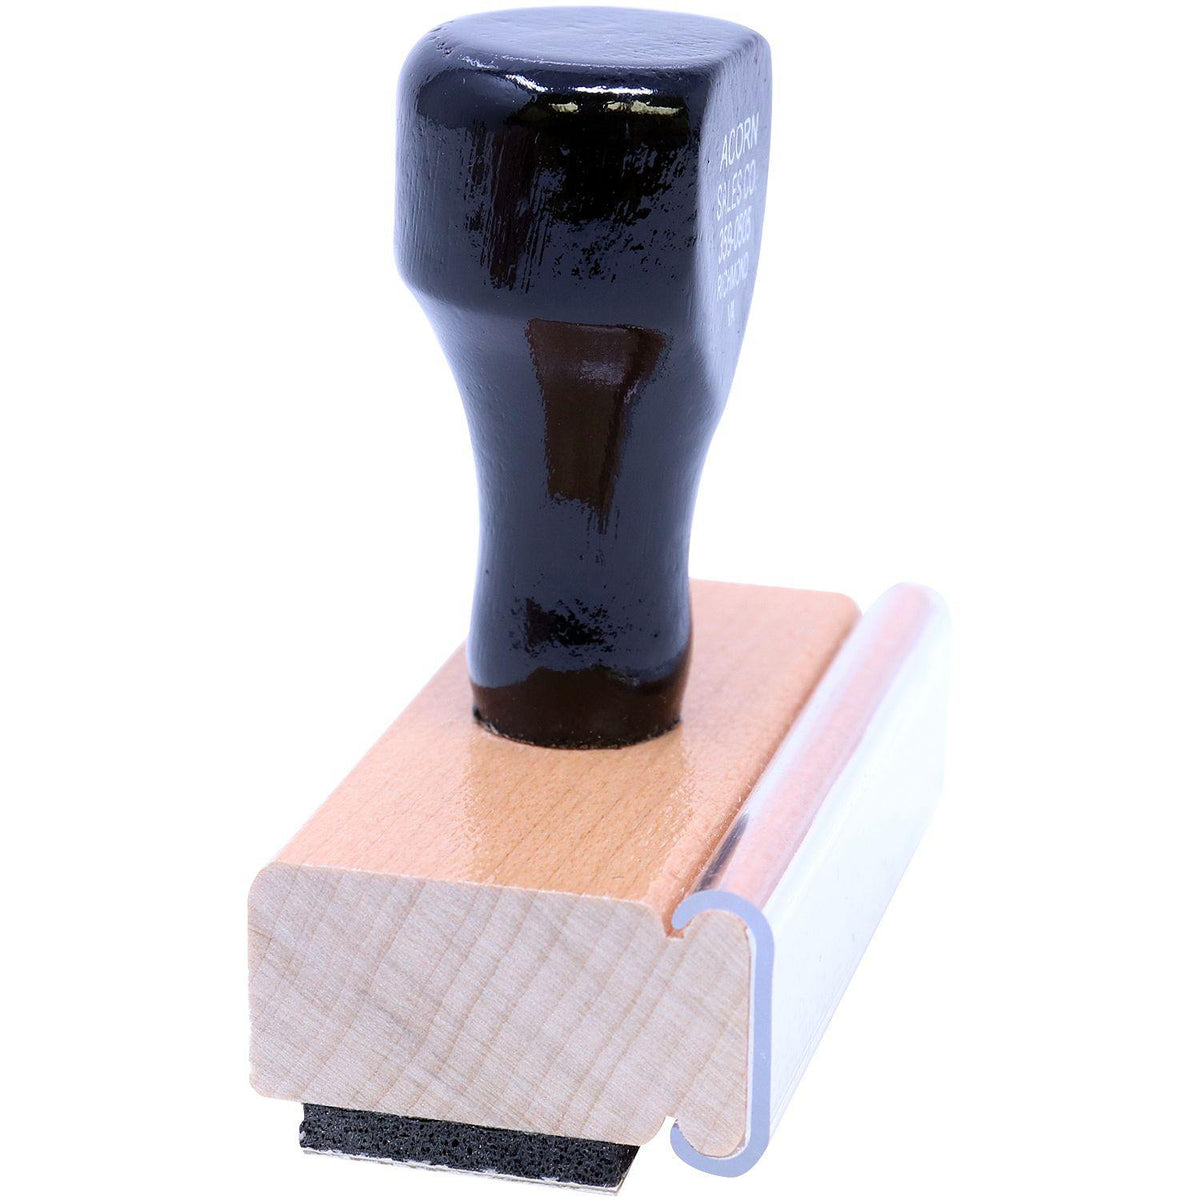 Side View of Anulado Rubber Stamp at an Angle